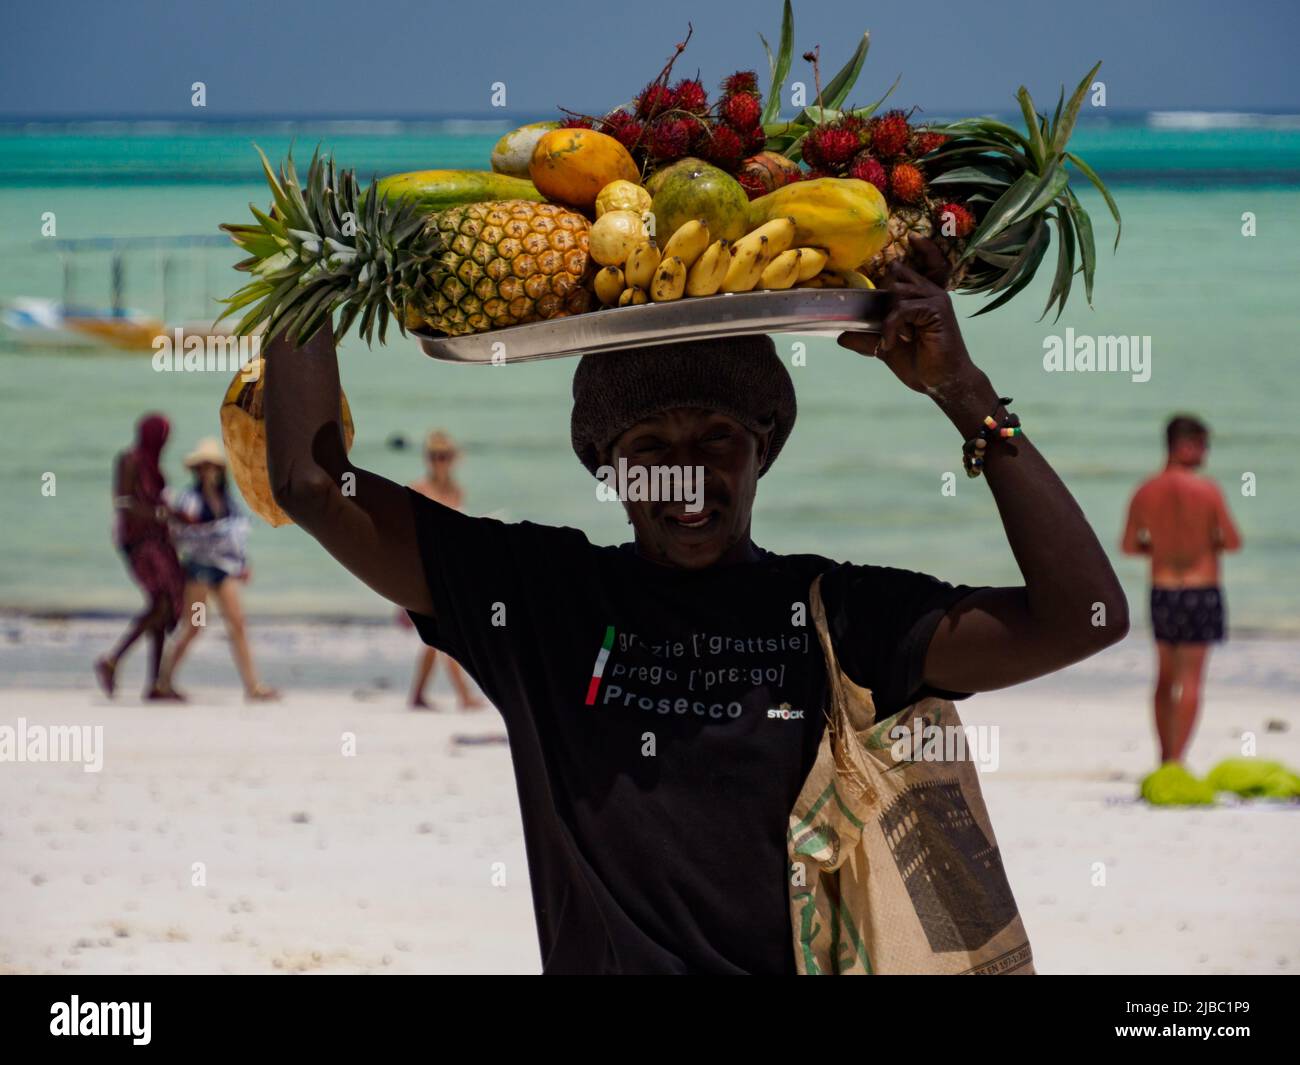 Paje, Zanzibar, Tanzania - January 202: African man with a tray full of exotic fruits on his head. Turquoise ocean water in the background. Africa Stock Photo